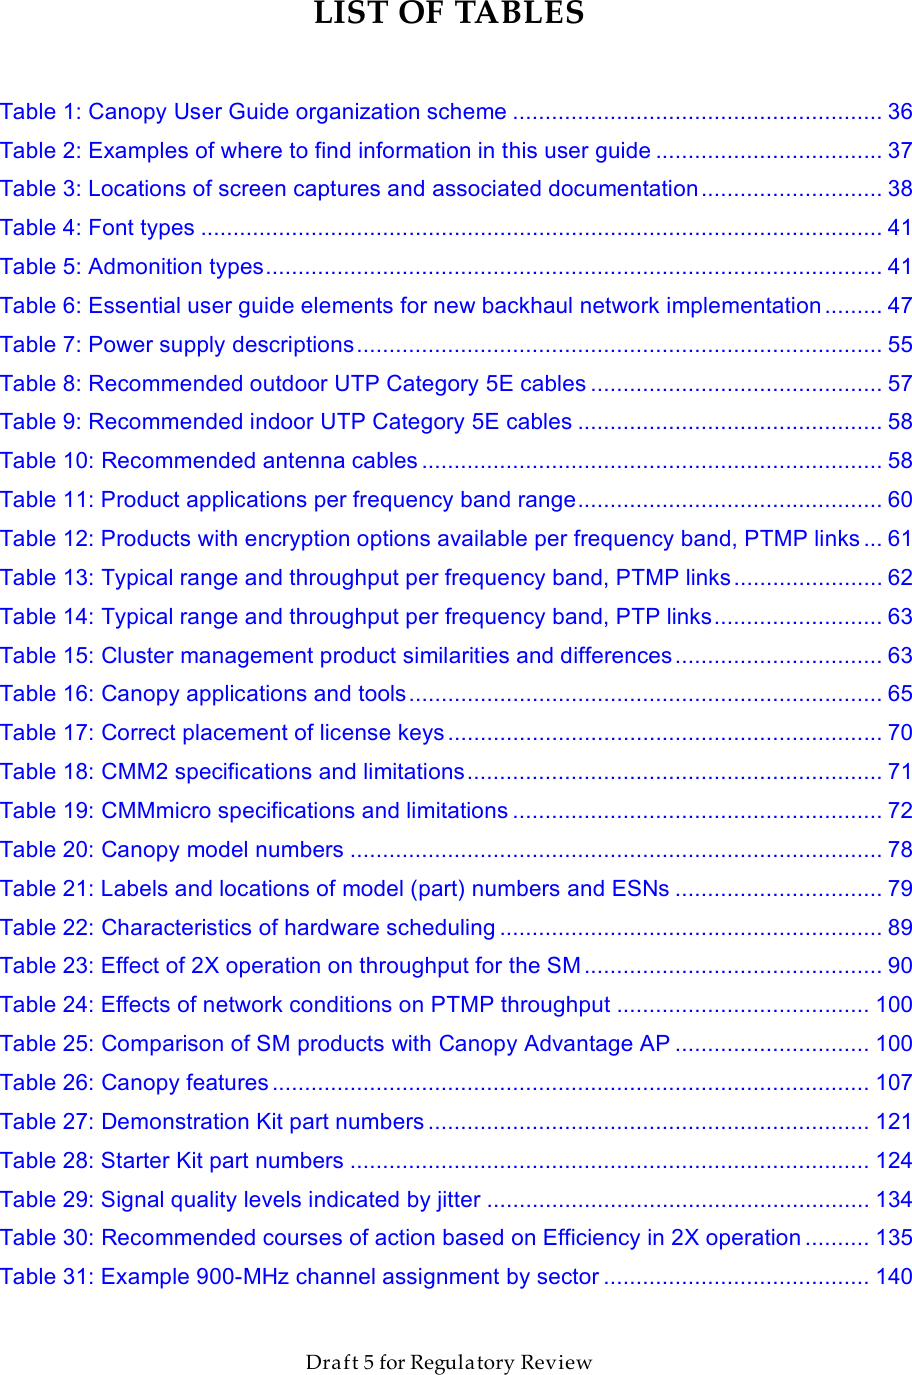                  March 200                  Through Software Release 6.       Draft 5 for Regulatory Review LIST OF TABLES  Table 1: Canopy User Guide organization scheme ......................................................... 36 Table 2: Examples of where to find information in this user guide ................................... 37 Table 3: Locations of screen captures and associated documentation ............................ 38 Table 4: Font types ......................................................................................................... 41 Table 5: Admonition types............................................................................................... 41 Table 6: Essential user guide elements for new backhaul network implementation ......... 47 Table 7: Power supply descriptions................................................................................. 55 Table 8: Recommended outdoor UTP Category 5E cables ............................................. 57 Table 9: Recommended indoor UTP Category 5E cables ............................................... 58 Table 10: Recommended antenna cables ....................................................................... 58 Table 11: Product applications per frequency band range............................................... 60 Table 12: Products with encryption options available per frequency band, PTMP links ... 61 Table 13: Typical range and throughput per frequency band, PTMP links ....................... 62 Table 14: Typical range and throughput per frequency band, PTP links.......................... 63 Table 15: Cluster management product similarities and differences ................................ 63 Table 16: Canopy applications and tools......................................................................... 65 Table 17: Correct placement of license keys................................................................... 70 Table 18: CMM2 specifications and limitations................................................................ 71 Table 19: CMMmicro specifications and limitations ......................................................... 72 Table 20: Canopy model numbers .................................................................................. 78 Table 21: Labels and locations of model (part) numbers and ESNs ................................ 79 Table 22: Characteristics of hardware scheduling ........................................................... 89 Table 23: Effect of 2X operation on throughput for the SM .............................................. 90 Table 24: Effects of network conditions on PTMP throughput ....................................... 100 Table 25: Comparison of SM products with Canopy Advantage AP .............................. 100 Table 26: Canopy features............................................................................................ 107 Table 27: Demonstration Kit part numbers .................................................................... 121 Table 28: Starter Kit part numbers ................................................................................ 124 Table 29: Signal quality levels indicated by jitter ........................................................... 134 Table 30: Recommended courses of action based on Efficiency in 2X operation .......... 135 Table 31: Example 900-MHz channel assignment by sector ......................................... 140 